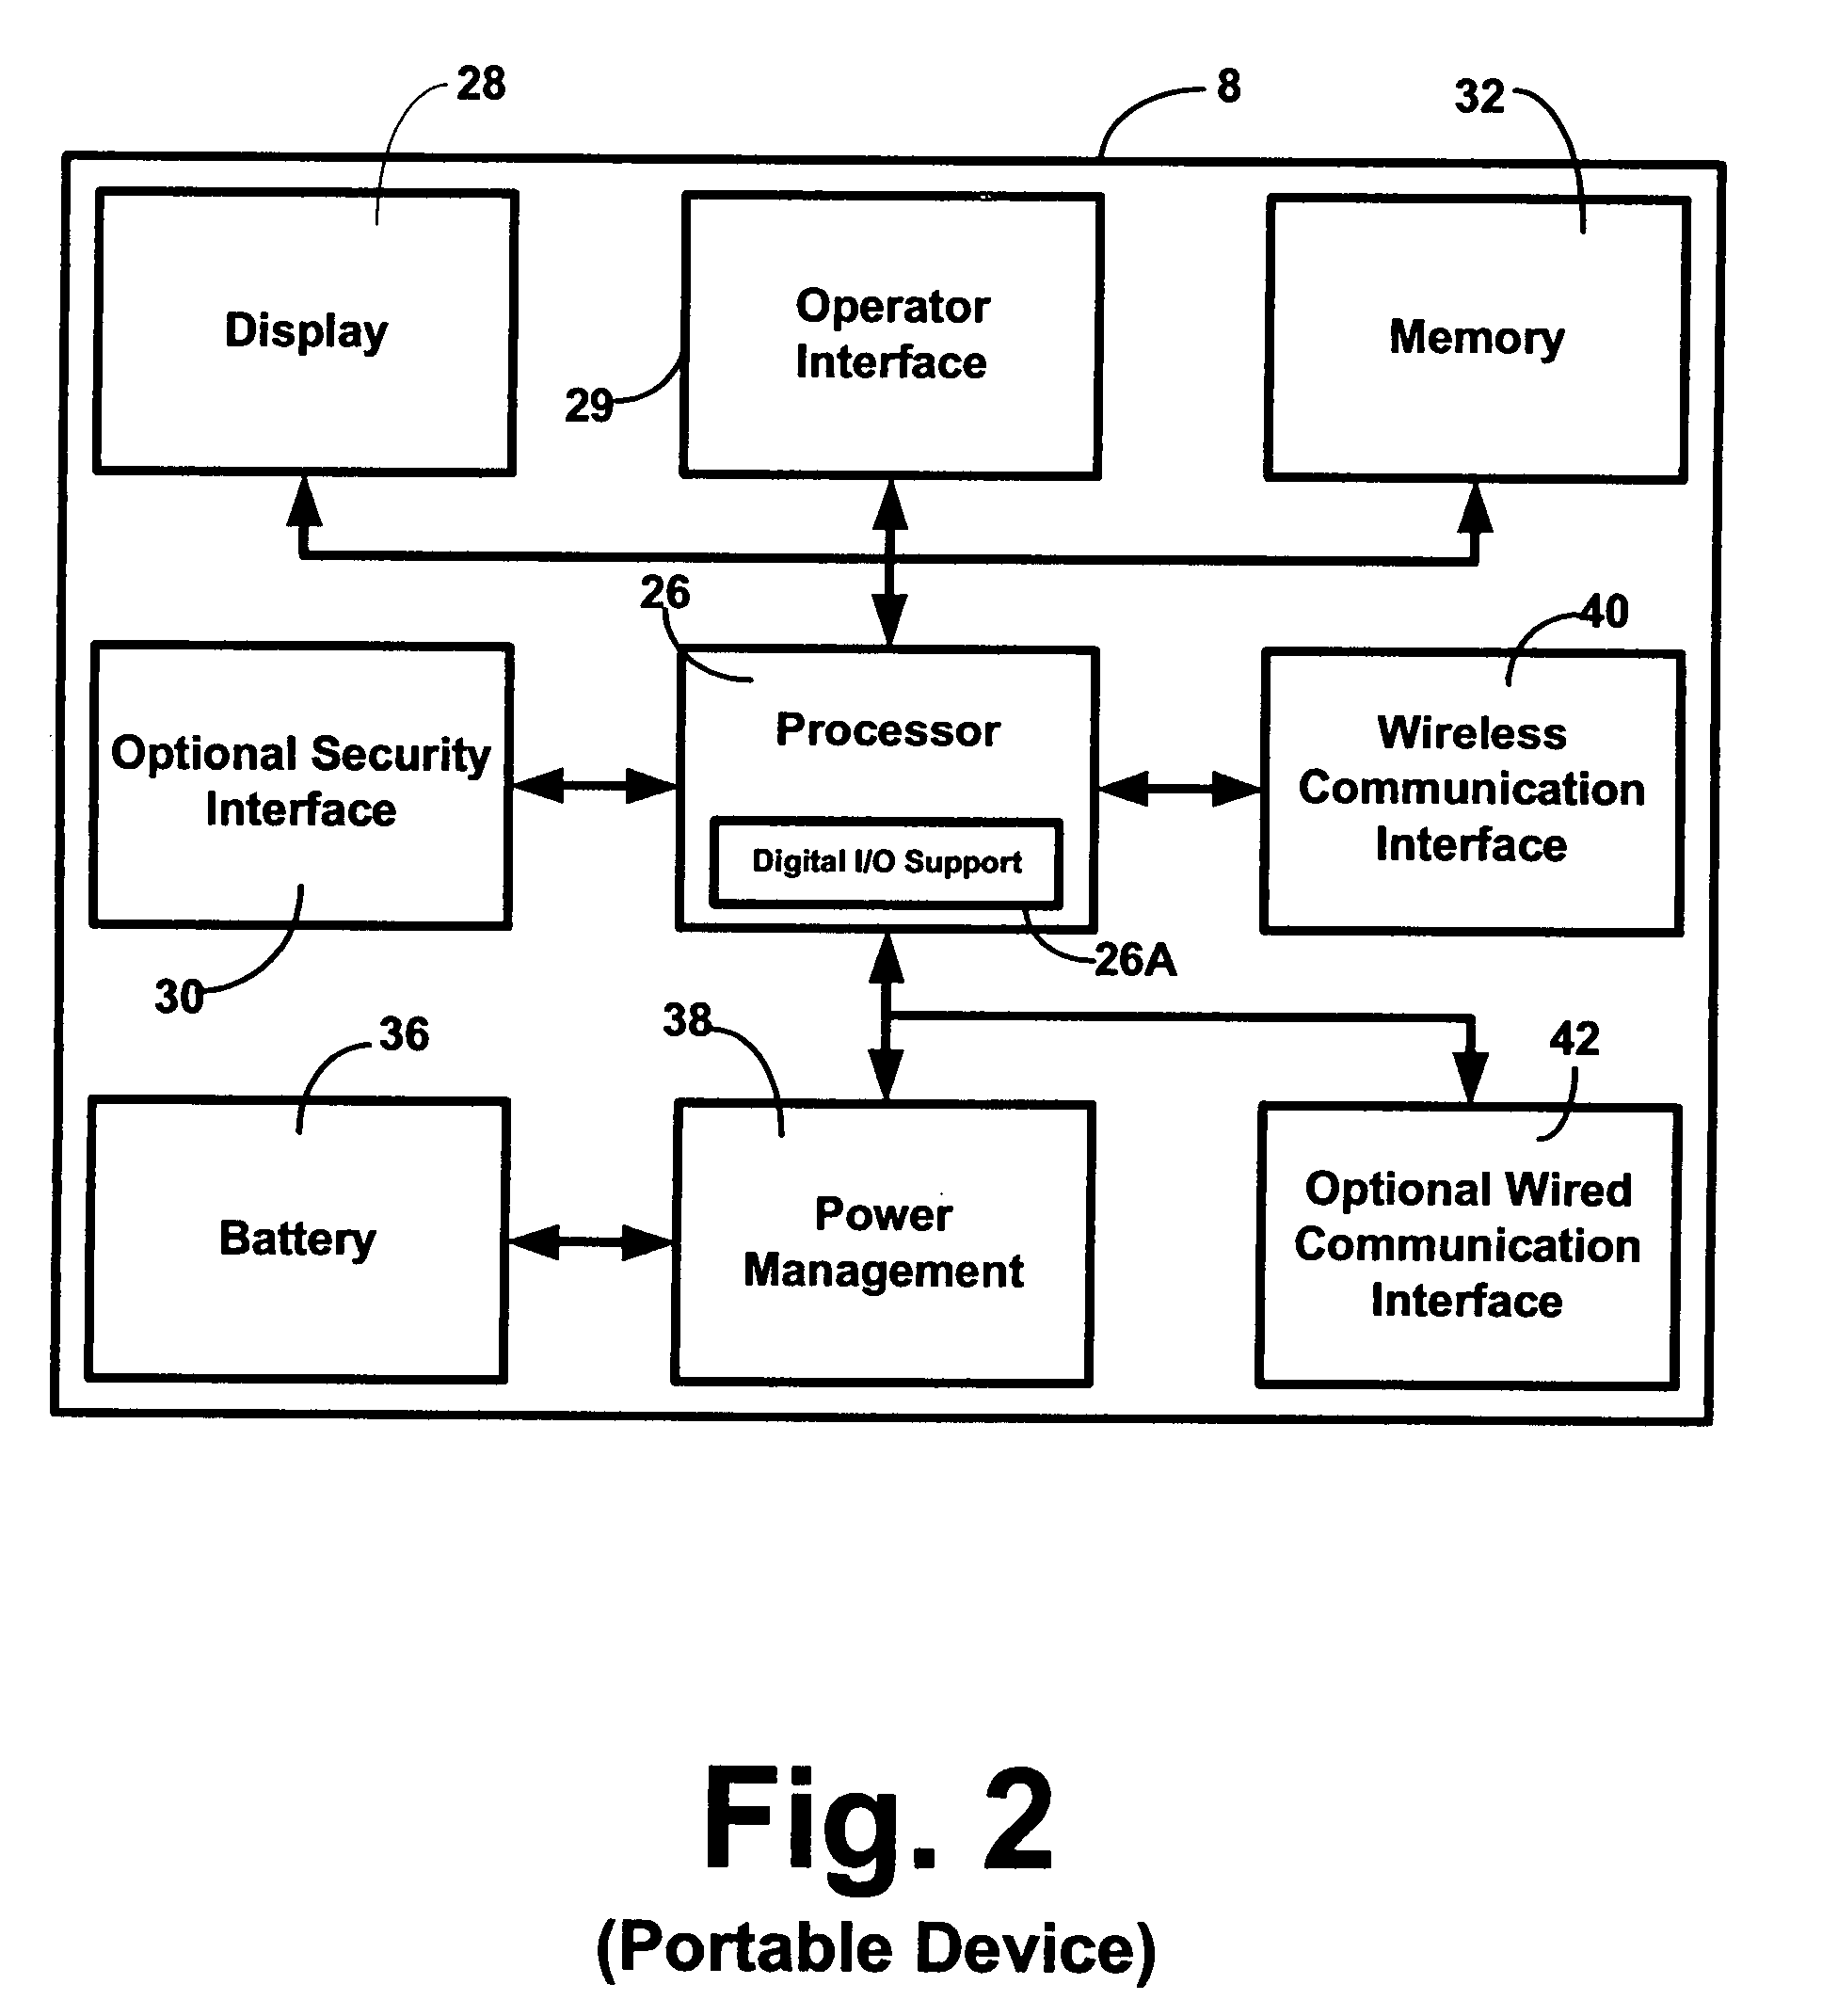 Method, system and apparatus for increasing the deposit-based assets of banking institutions subject to fractional-reserve banking